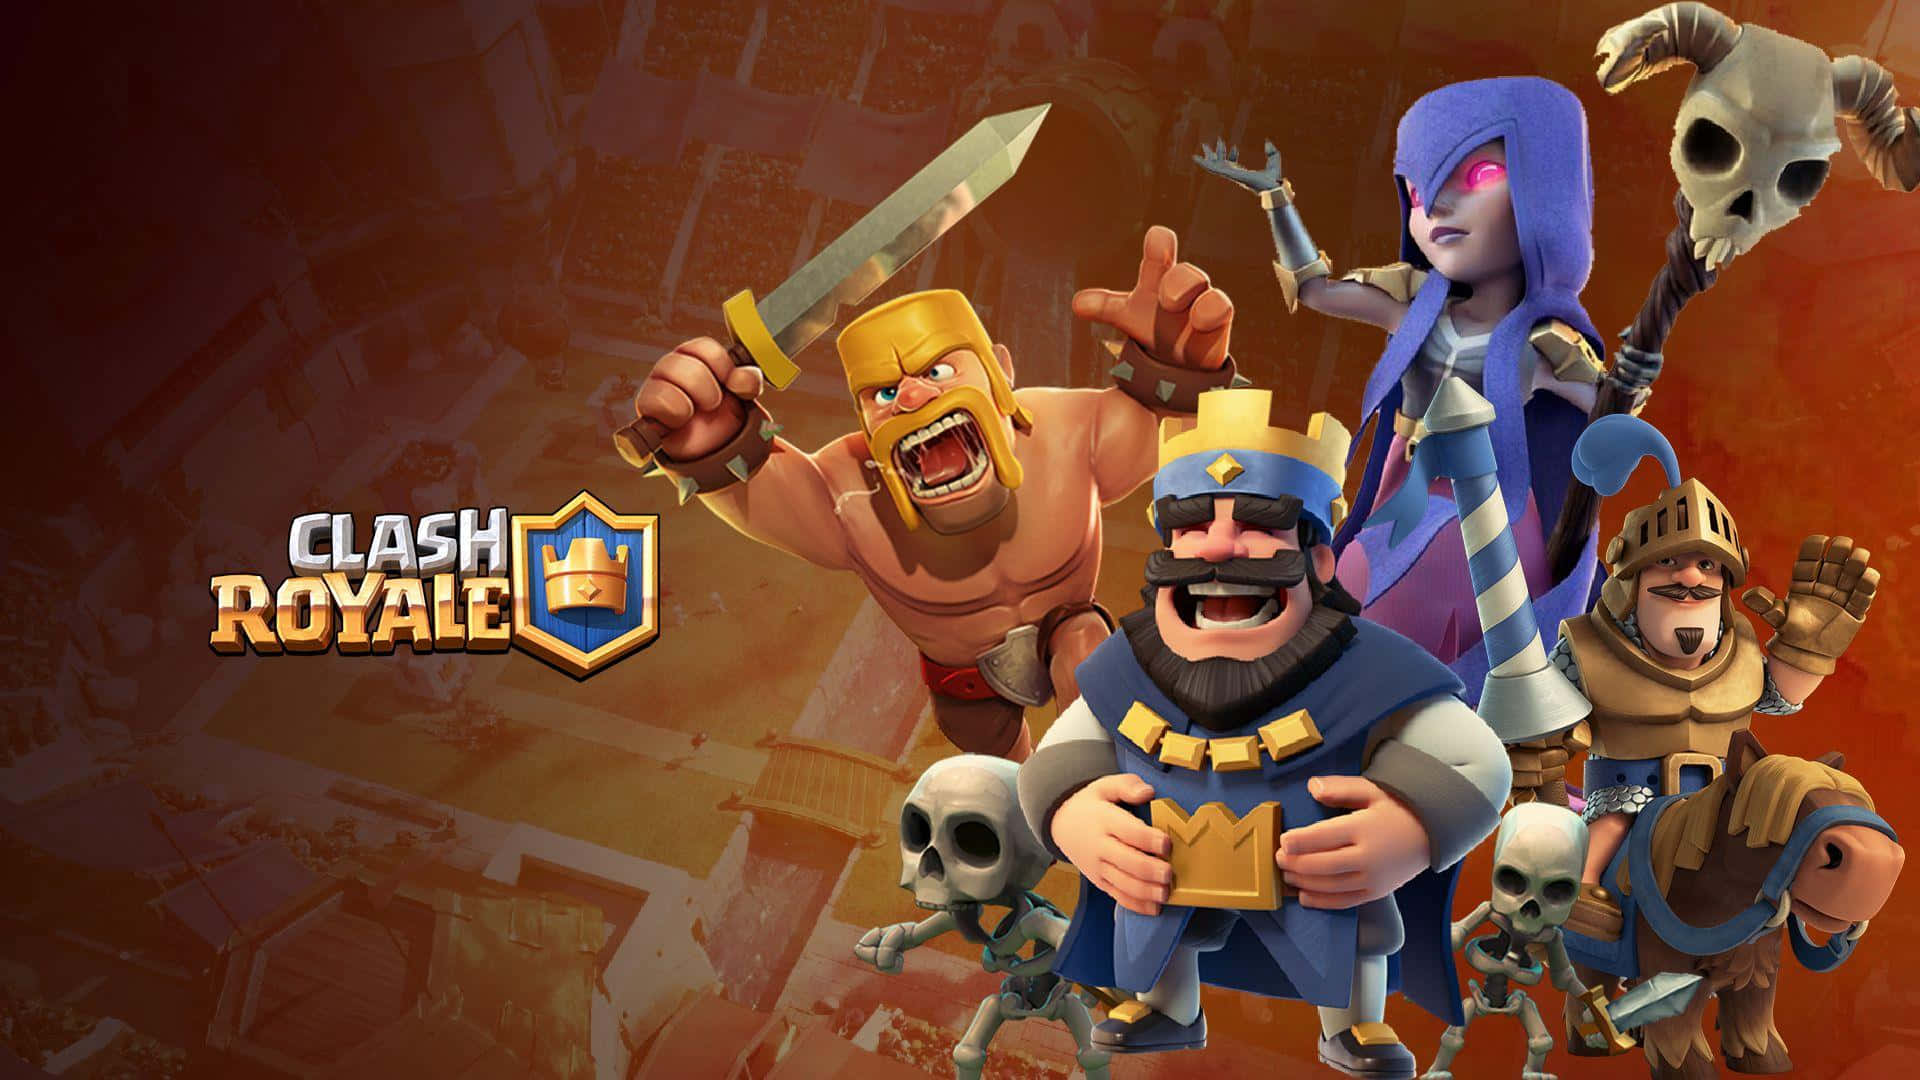 "Become a Clash Royale Master with the help of strategies and teamwork".